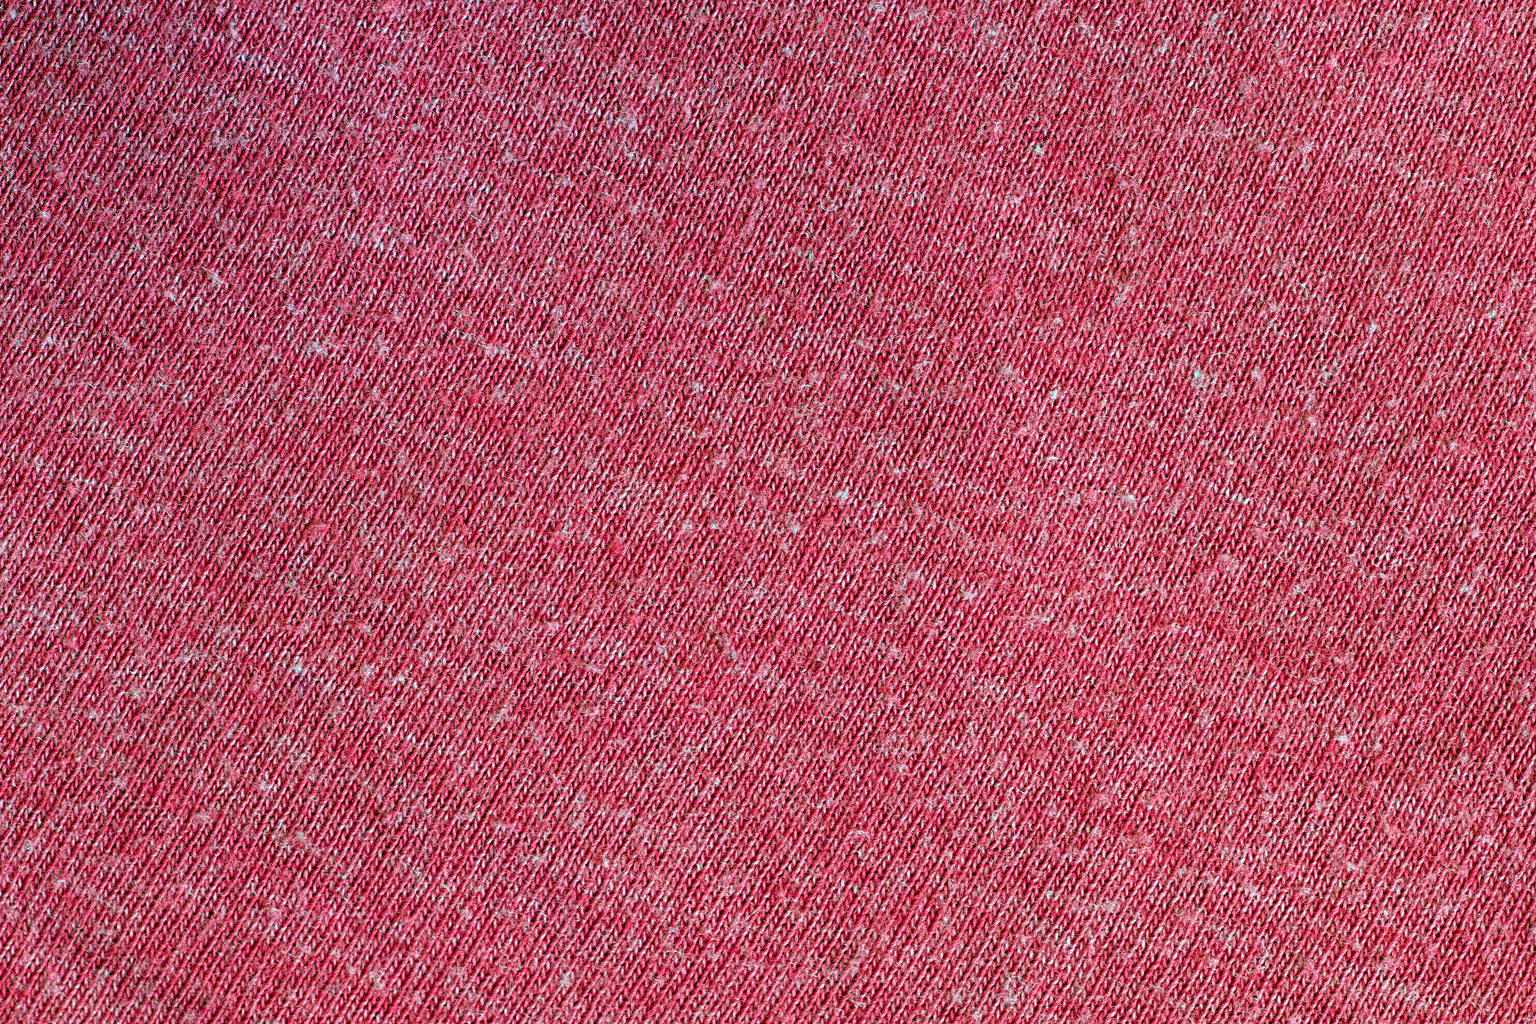 Heathered Red T-Shirt Texture